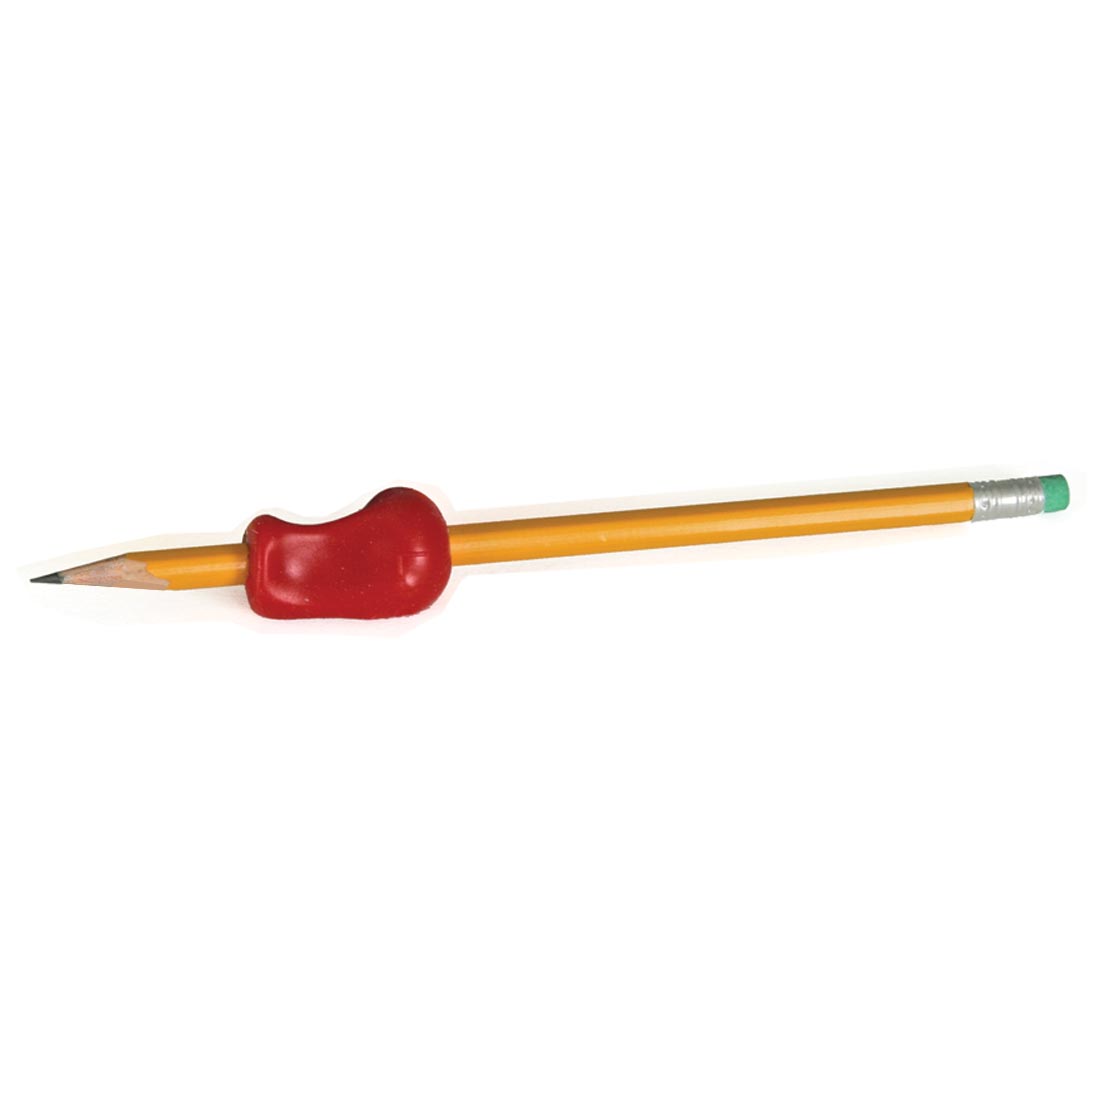 The Pencil Grip Regular Size Bright on a pencil